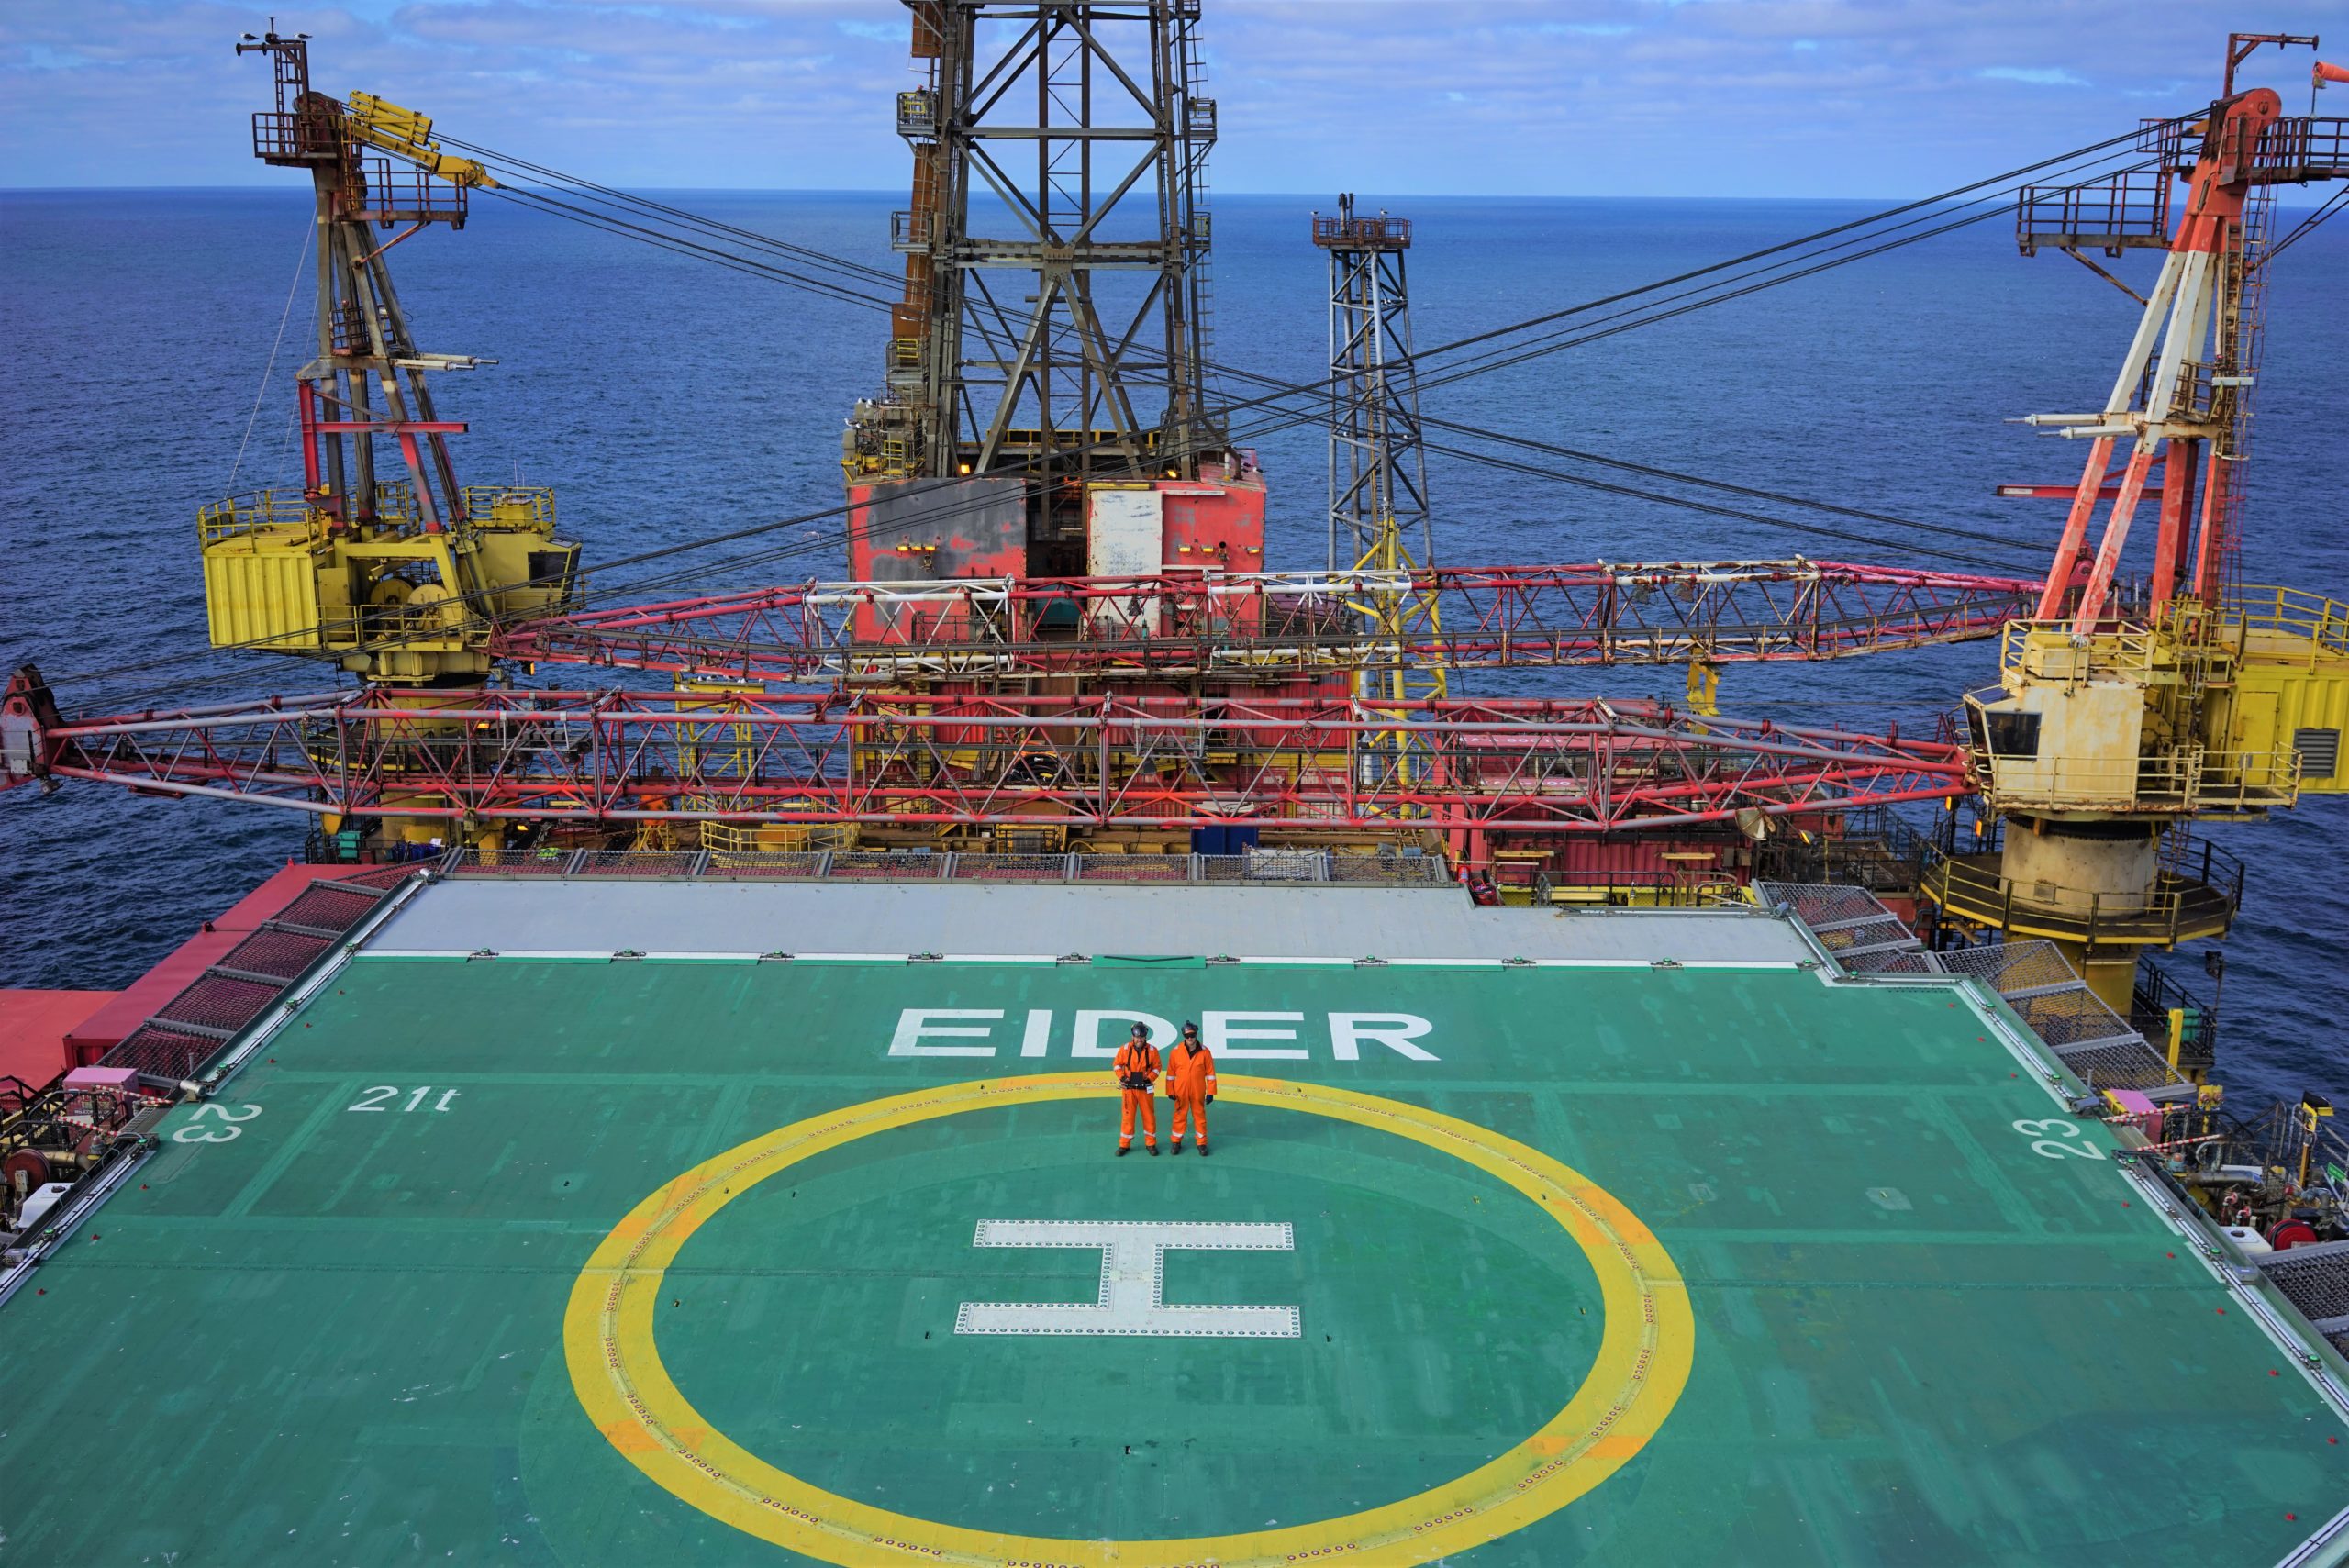 Texo DSI Delivers 3D Digital Twins in the North Sea